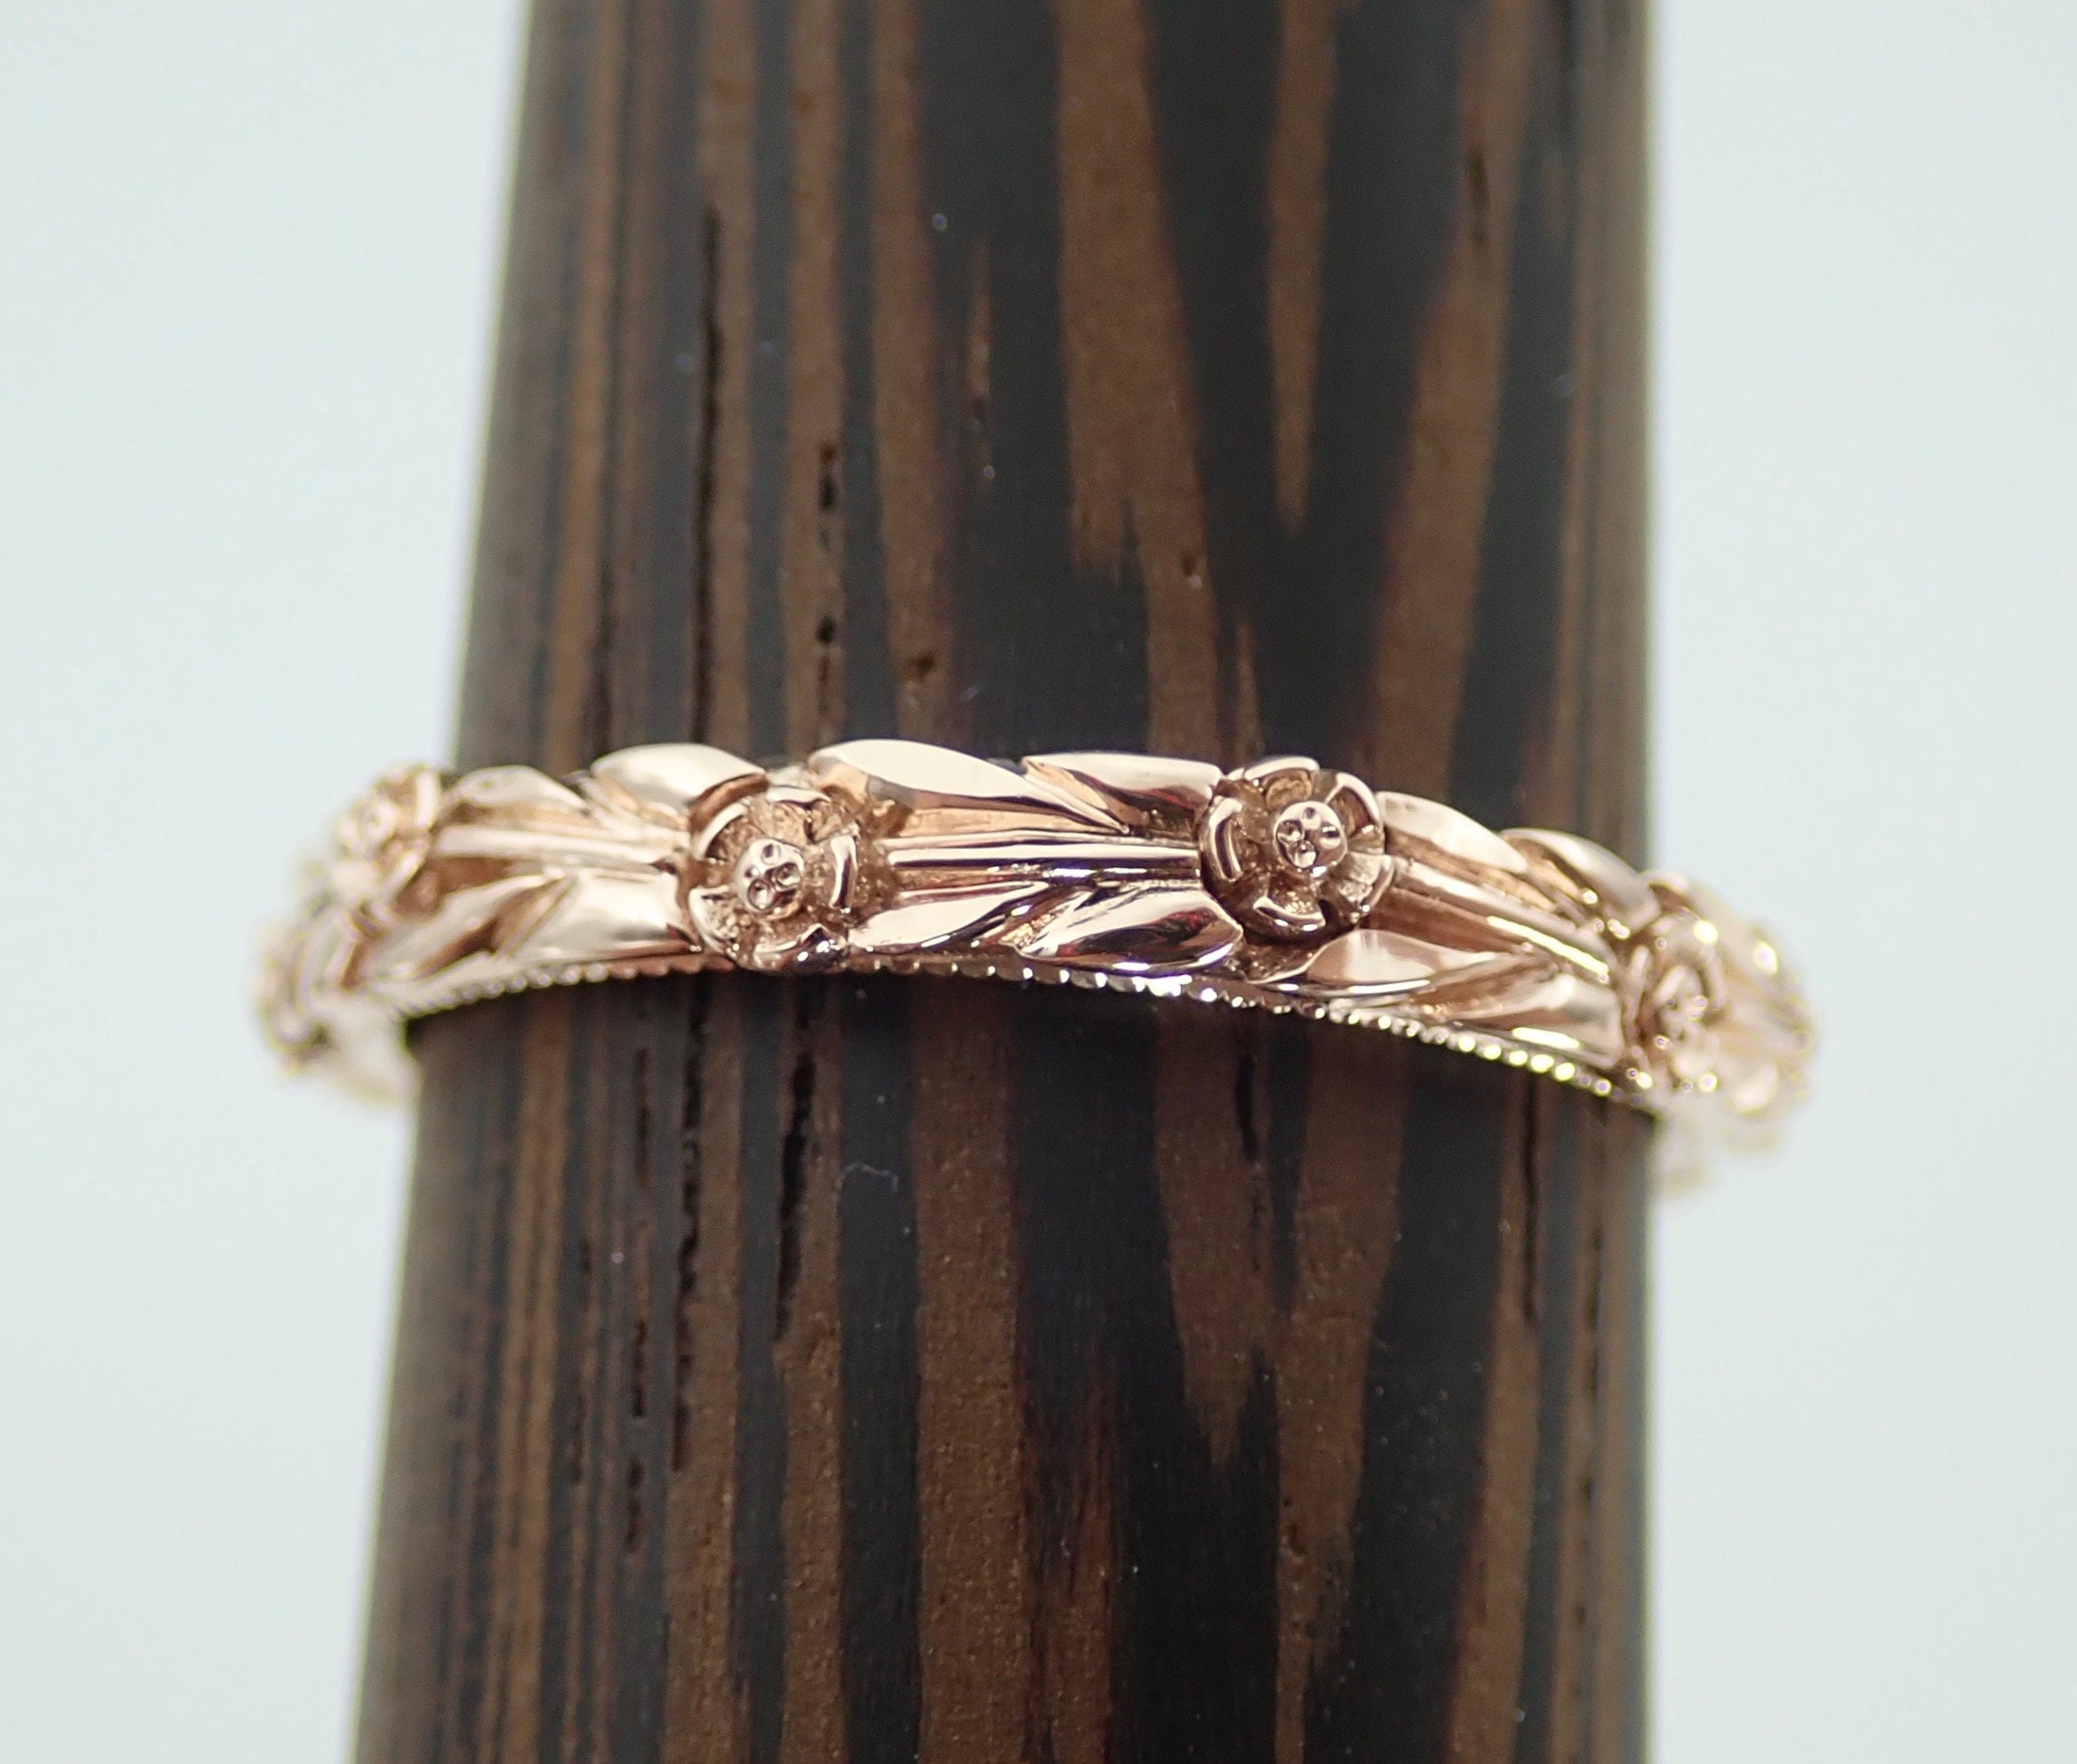 Rose gold Carved Flower Band with Milgrain Edge 2.5 mm Wide | Etsy